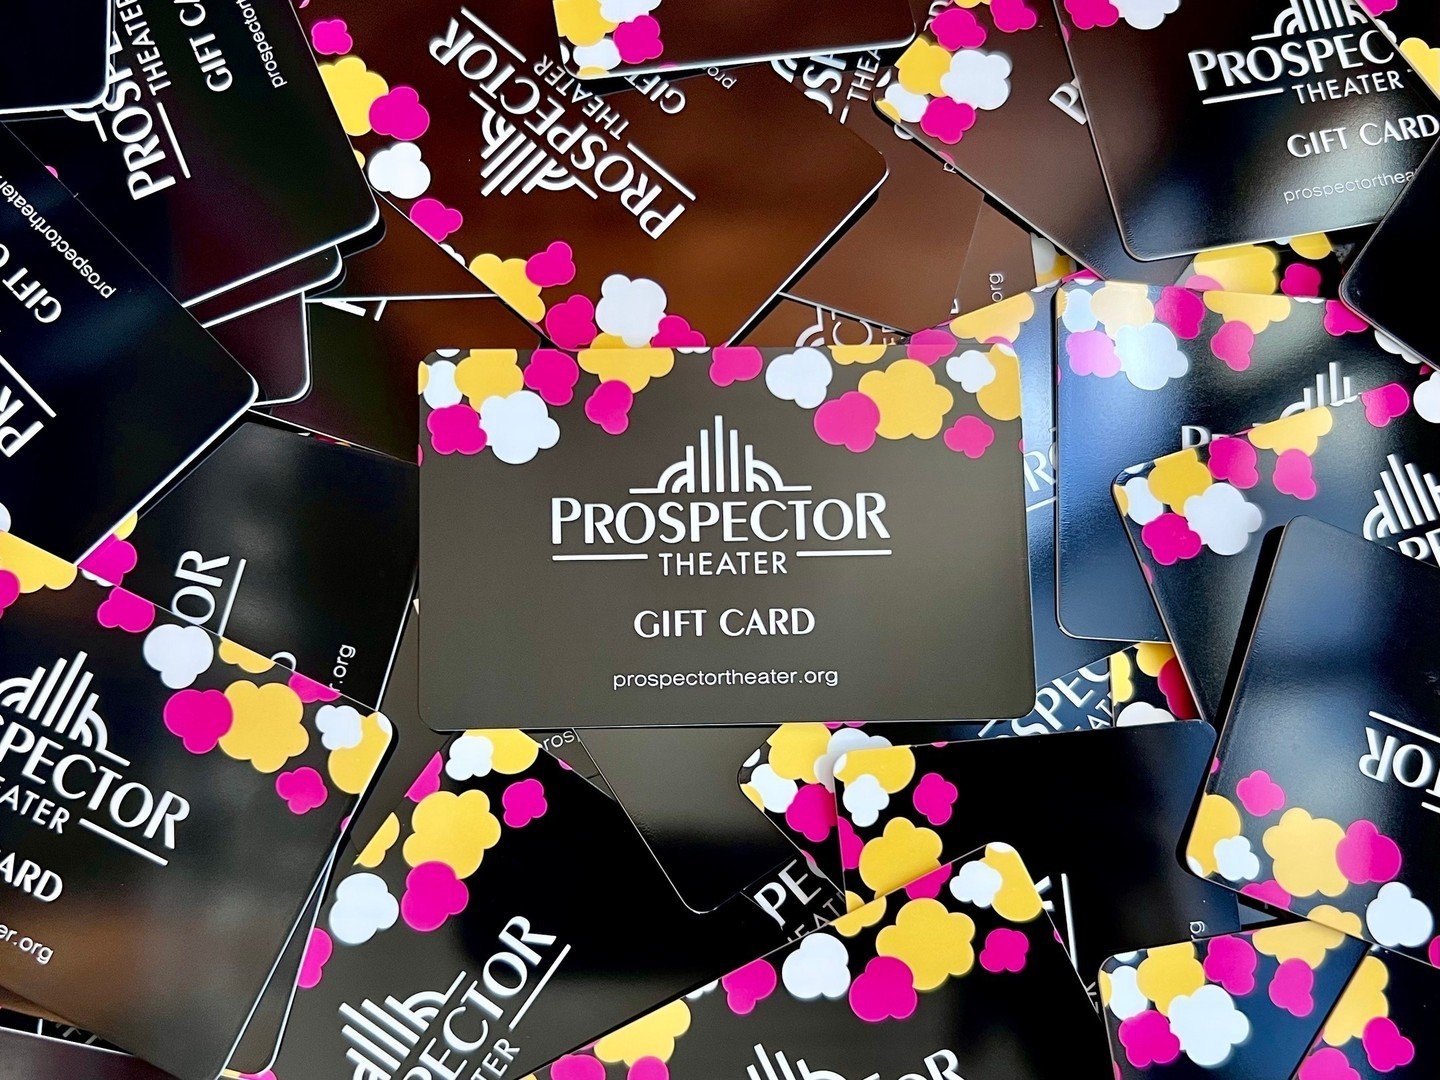 Give the gift of movies this spring! Pick up gift cards at our Box Office 🍿🎥💖 ⁠
.⁠
.⁠
.⁠
.⁠
.⁠
Photo caption: Prospector gift cards fill the frame. ⁠
#SparkleOn #ProspectorTheater #WorkingIsWorking